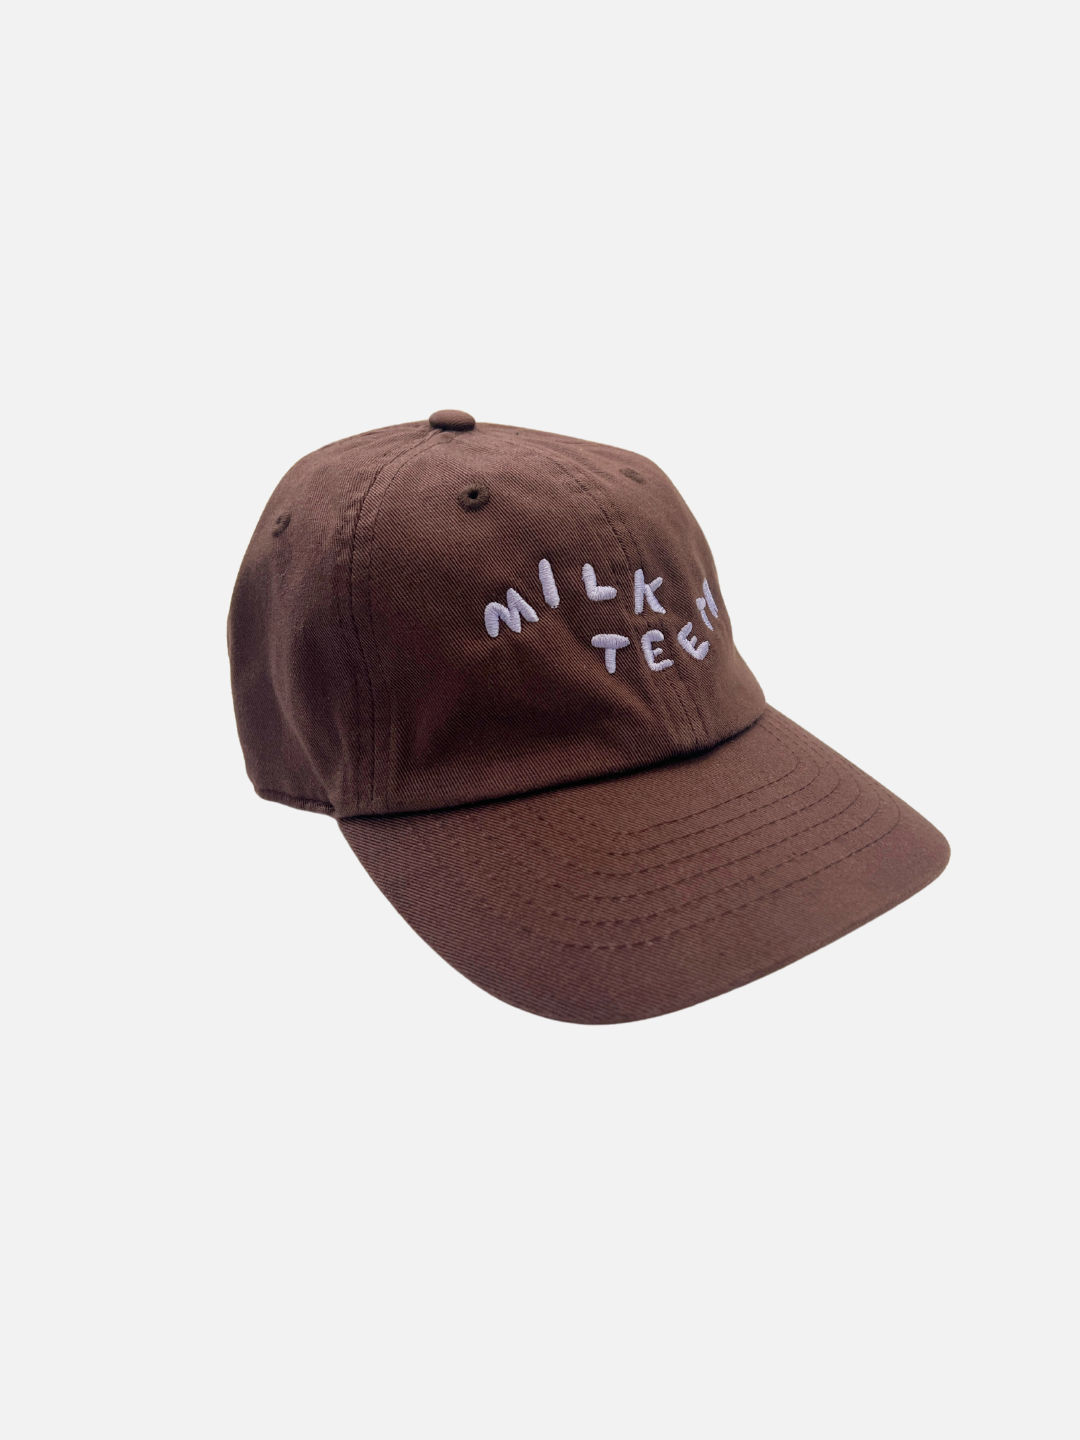 A front view of the Milk Teeth Cap with lavender embroidery